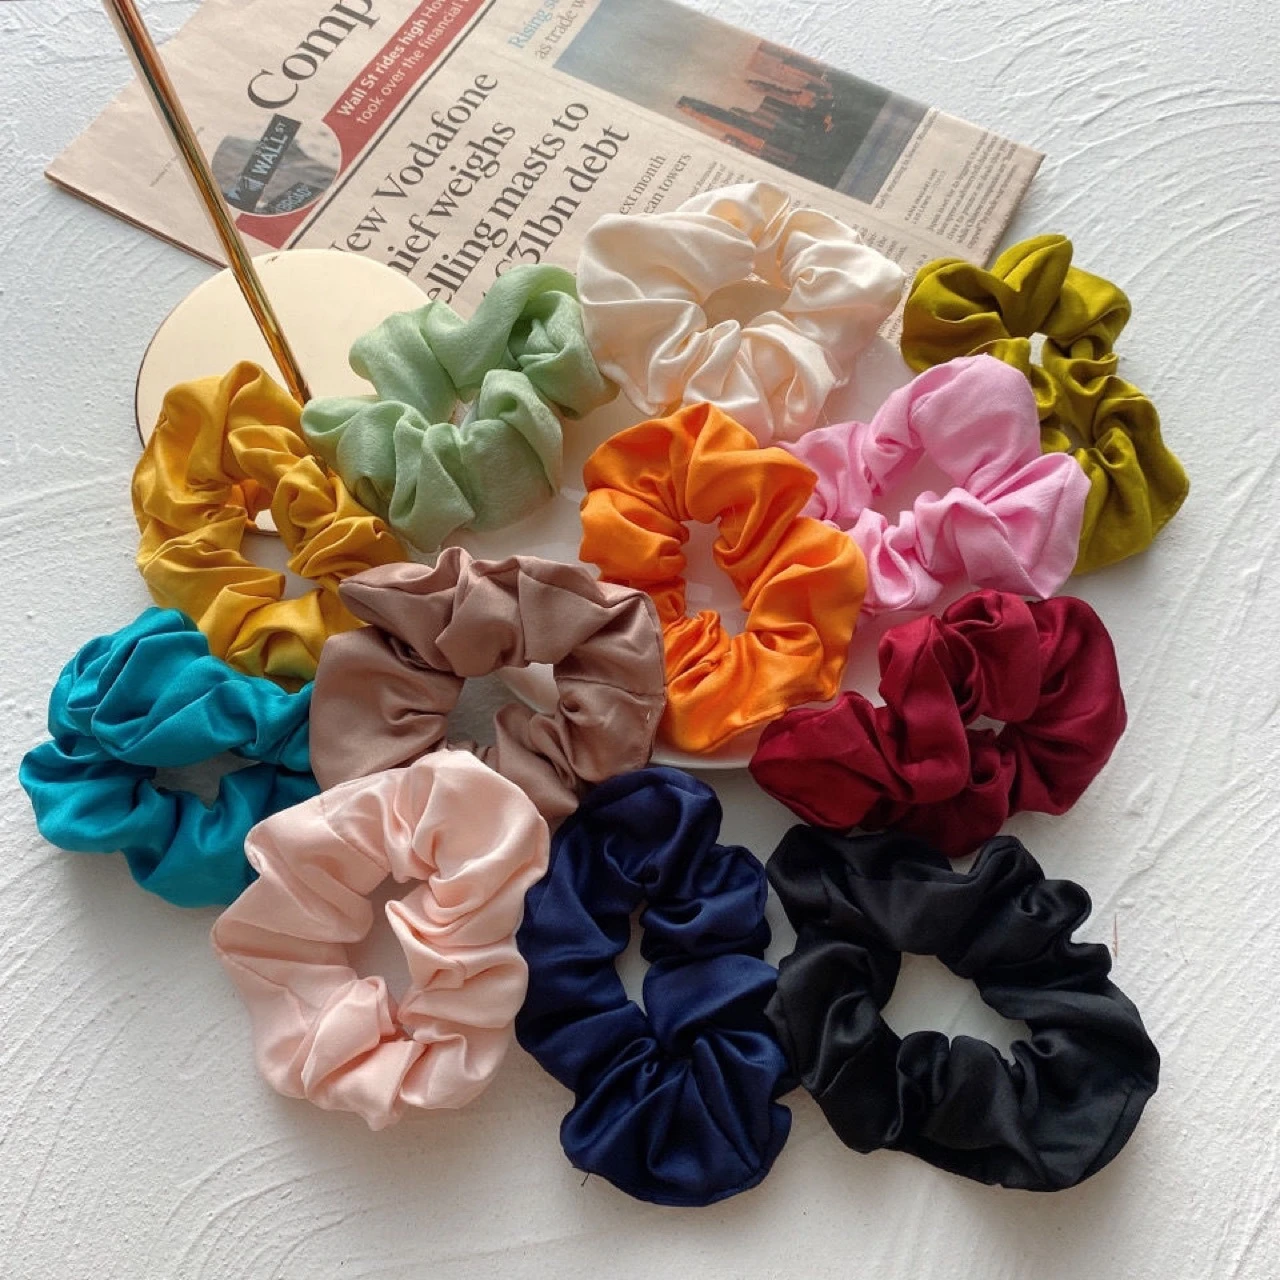 Hairclip 10 Pcs/Lot Satin Scrunchies Girls Ribbon Accessories Solid Ponytail Holder Hair Ties Gum Rope Elastic Hair Bands For Women knot hair band